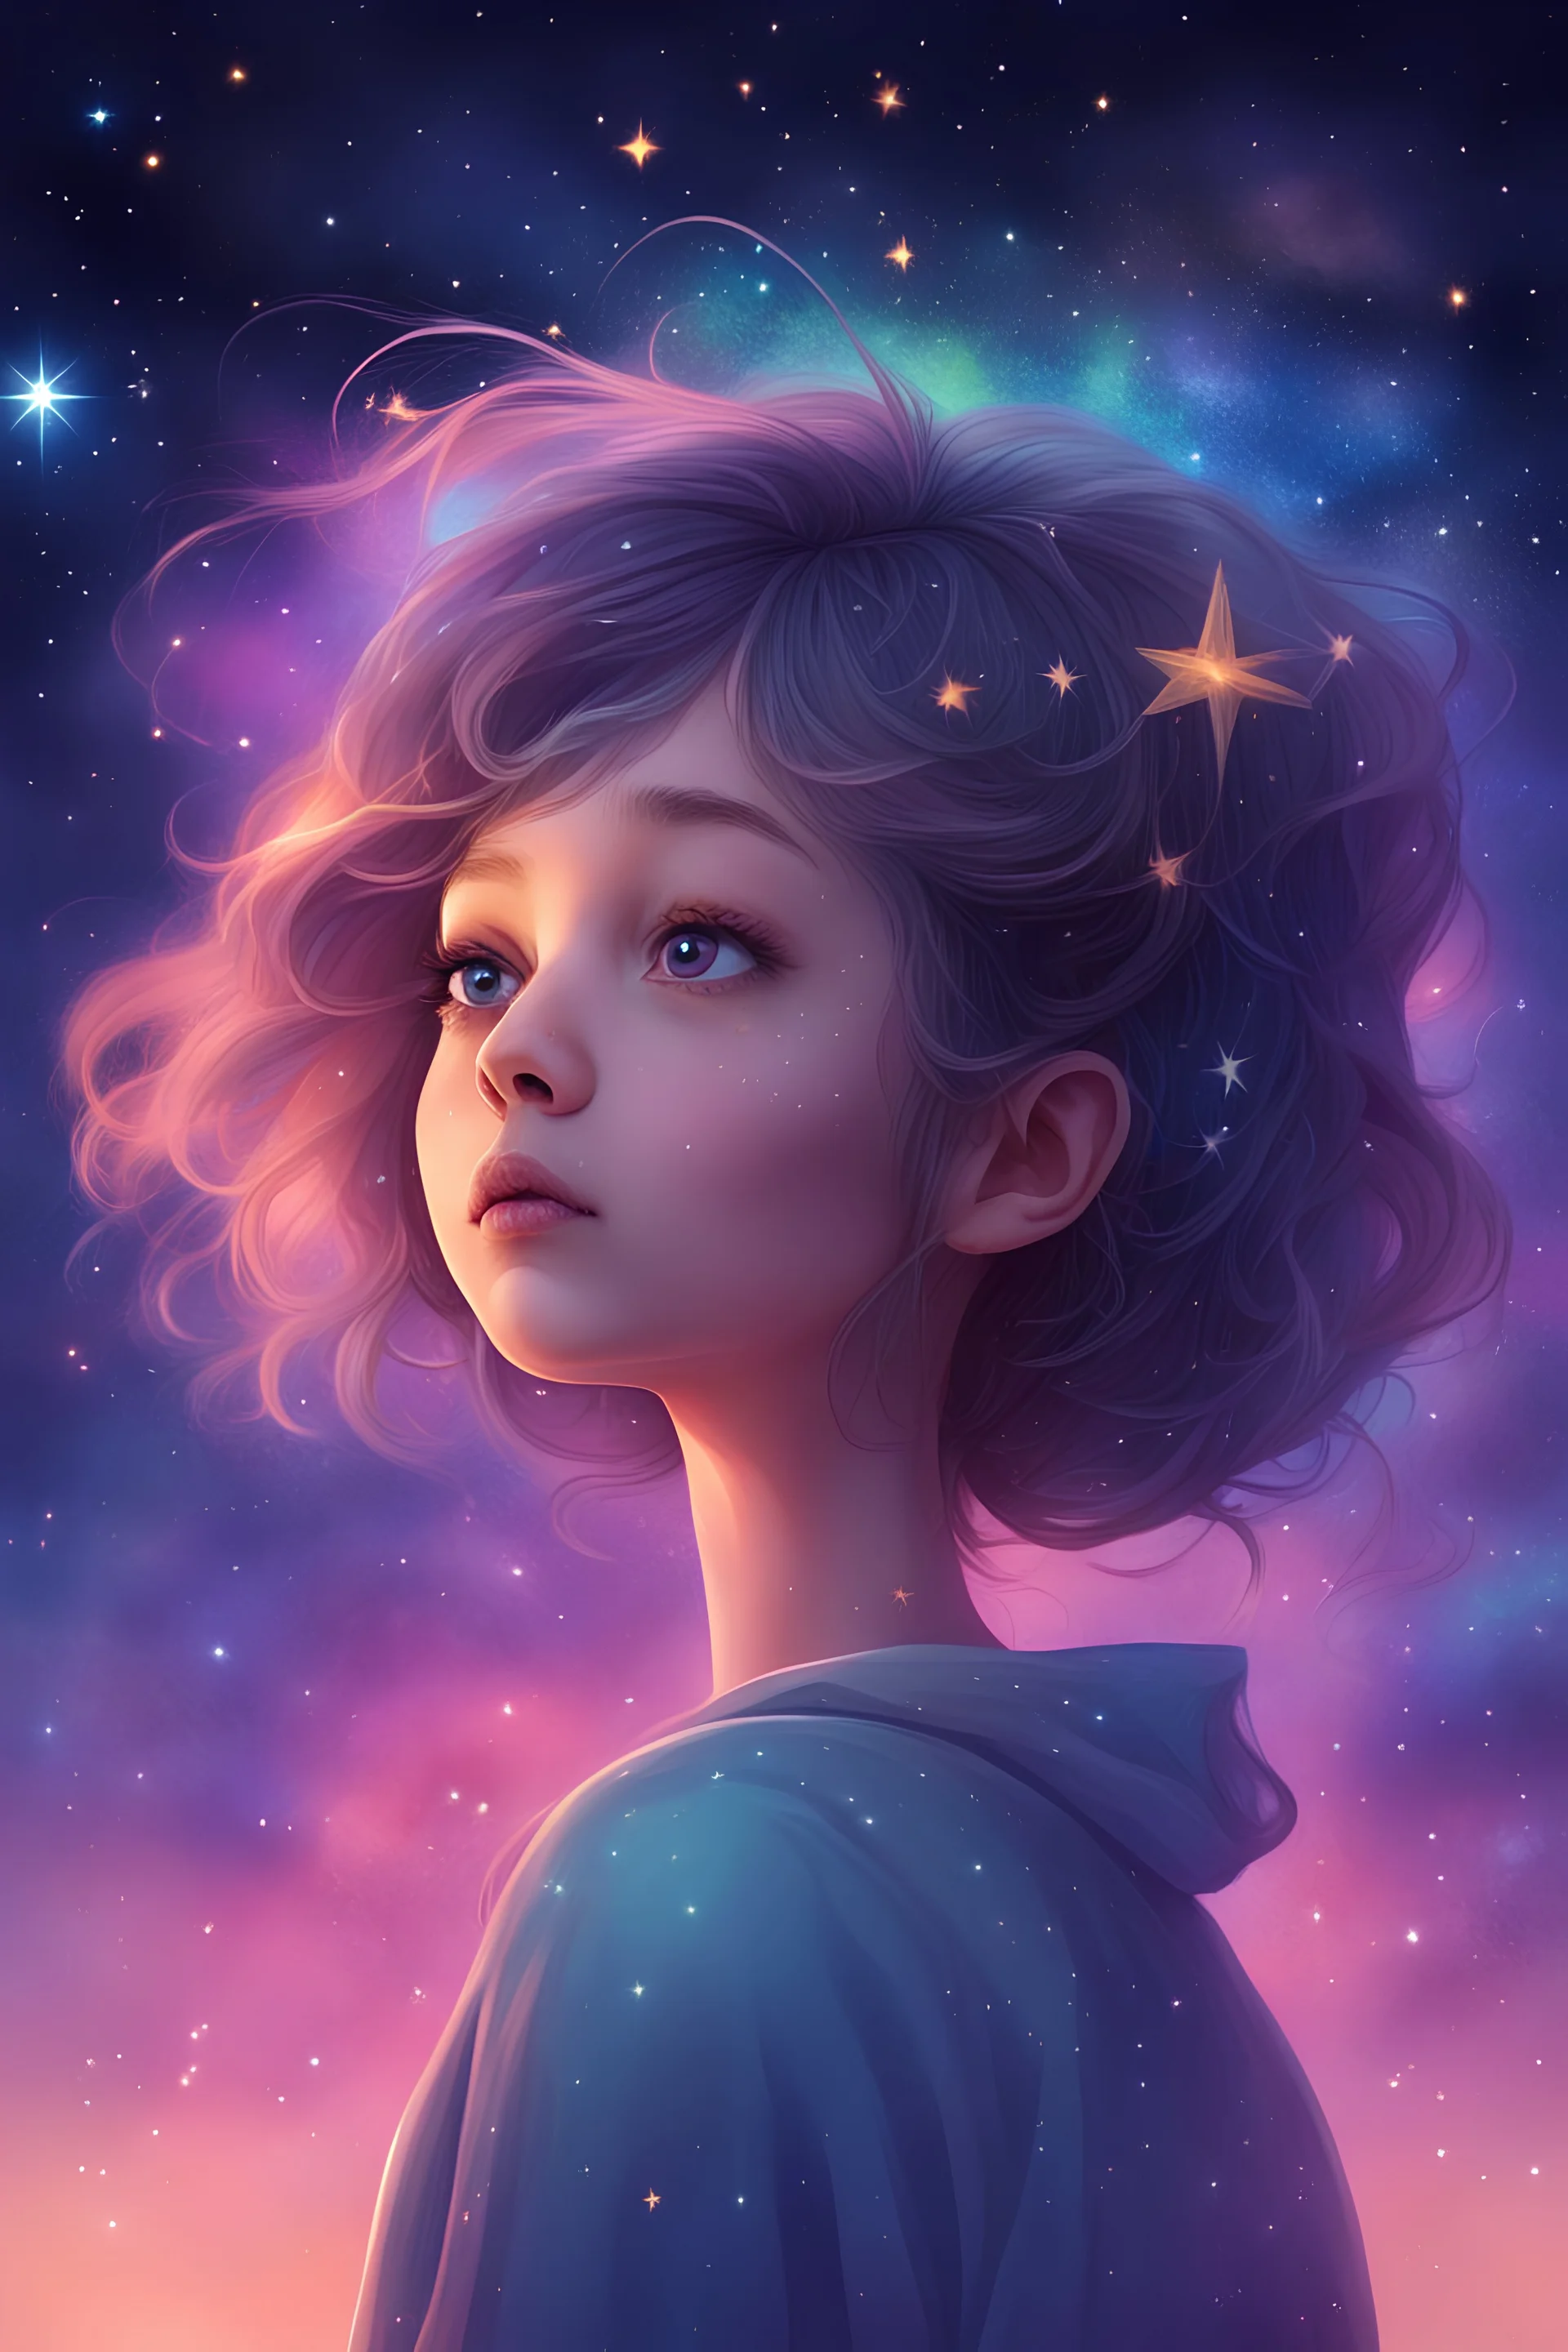 She is a girl with no Facial features drawn looking to the sky in the night that is full of stars and Meteors with a star clip in her hair with a colorful background